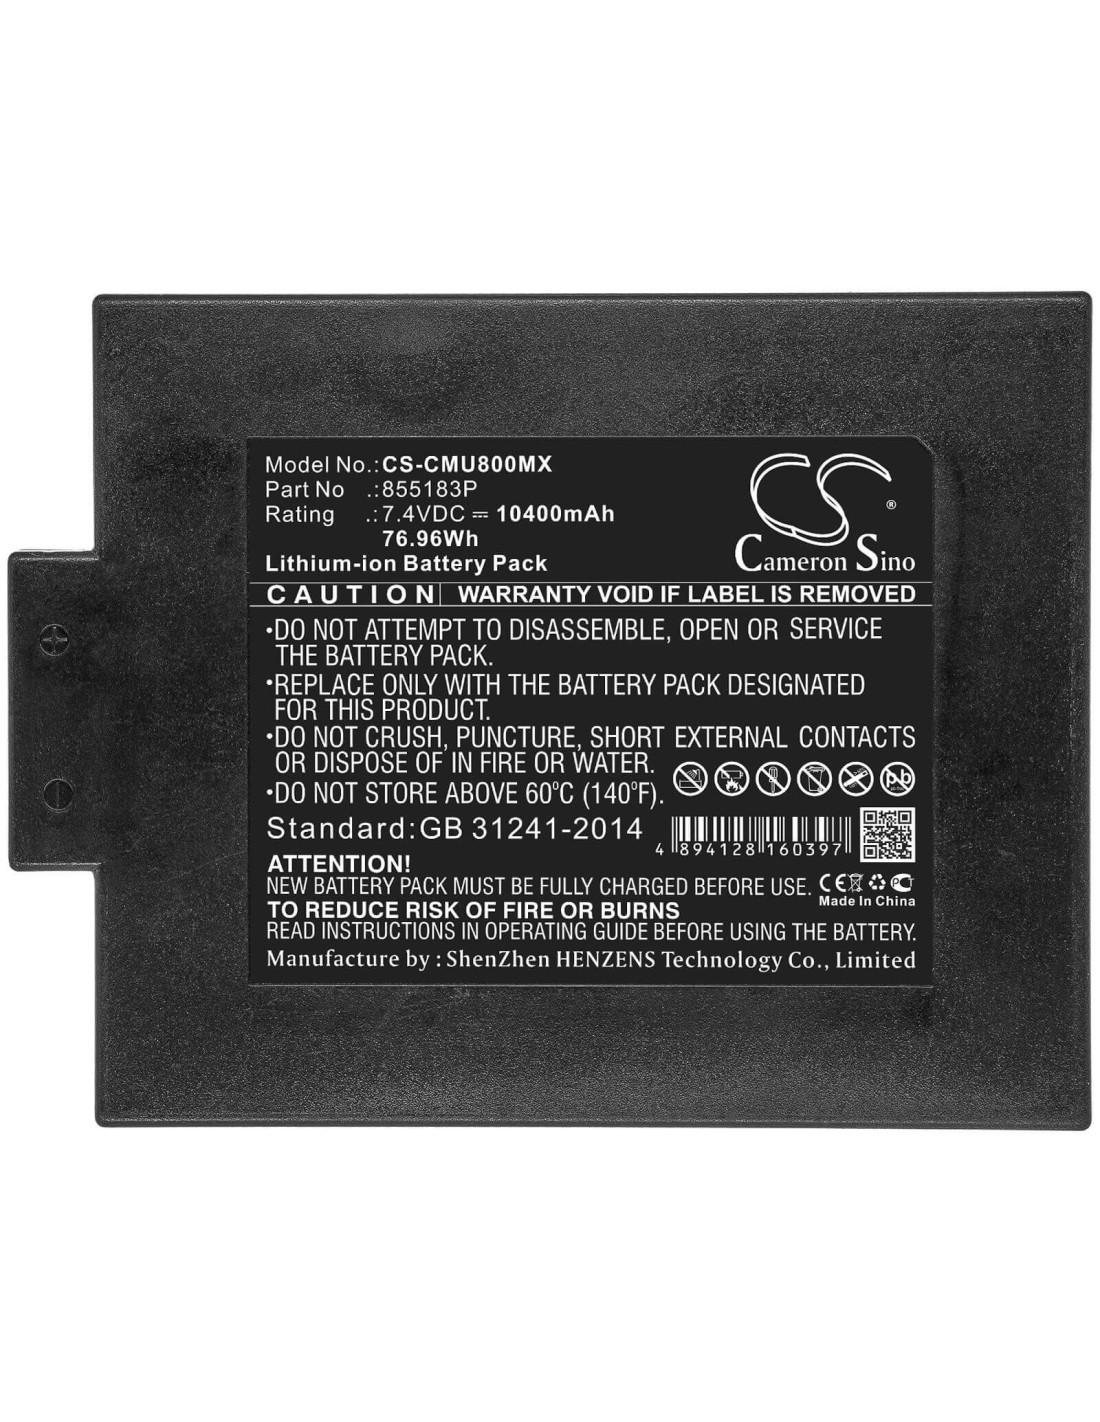 Battery for Contec, Cms8000 Icu Patient Monitor 7.4V, 10400mAh - 76.96Wh